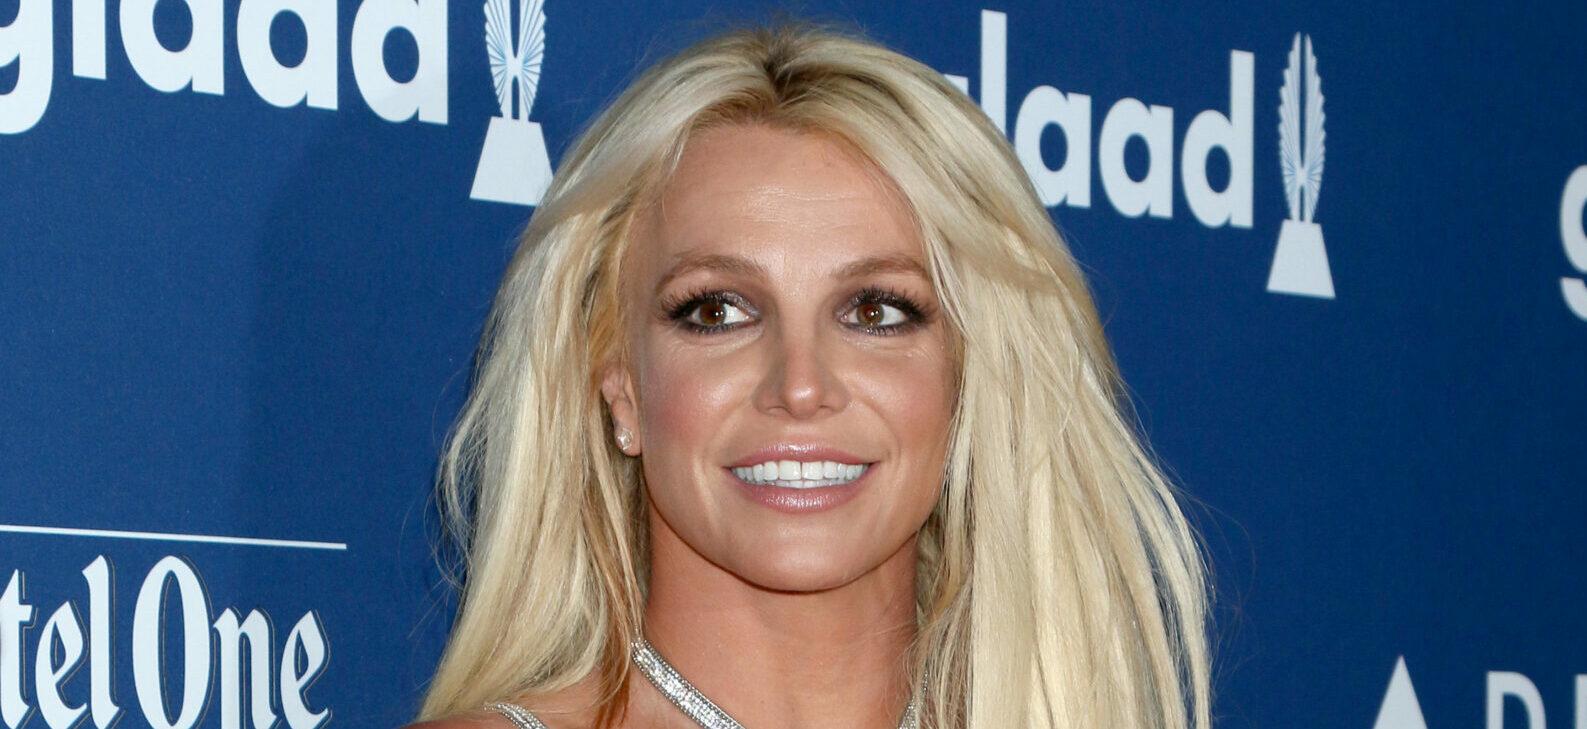 Britney Spears Reportedly To Give Up On Concerts, Touring